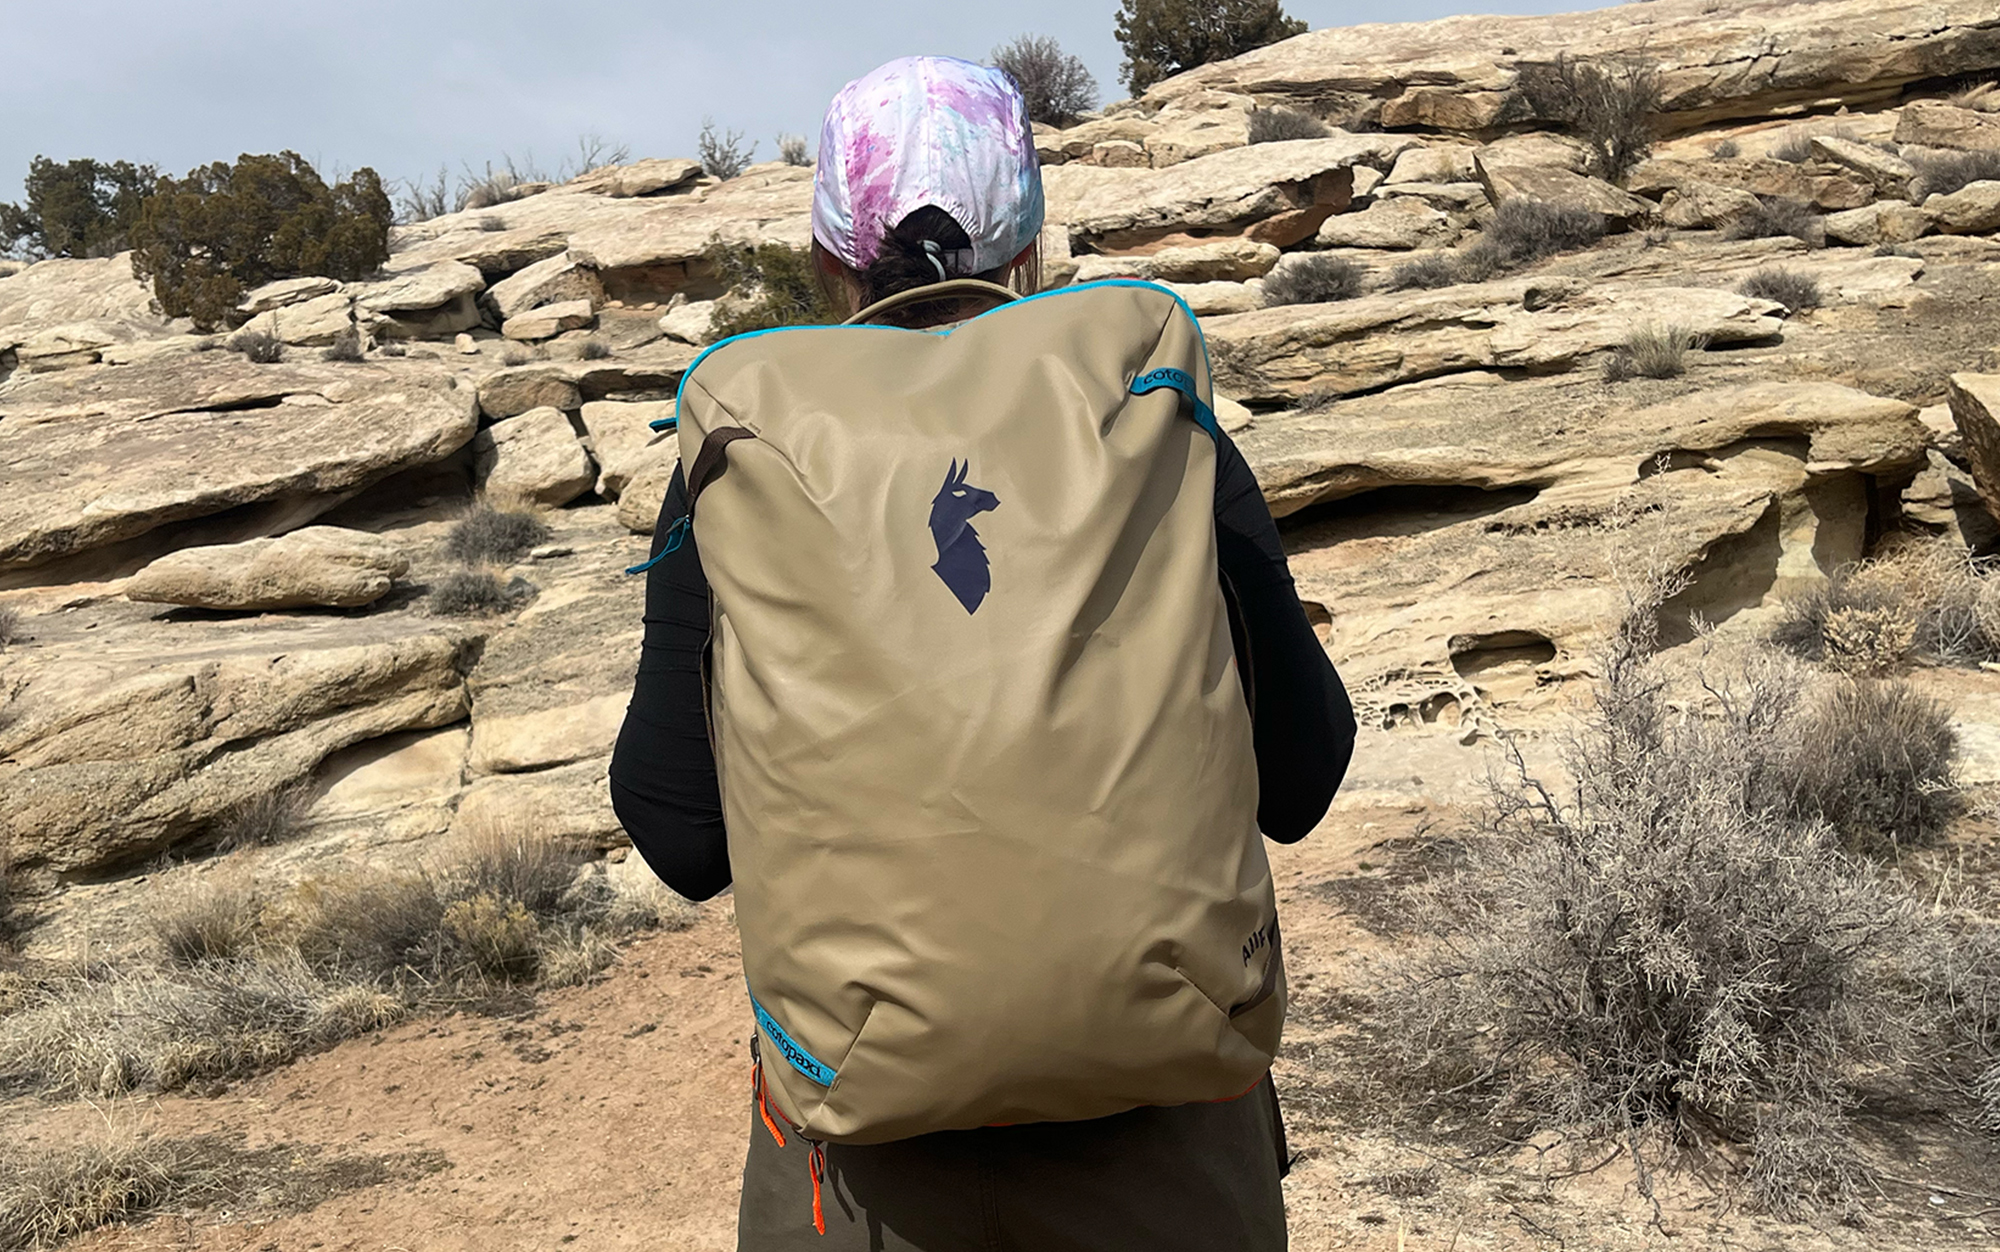 The desert color option is spot on for this best travel backpack